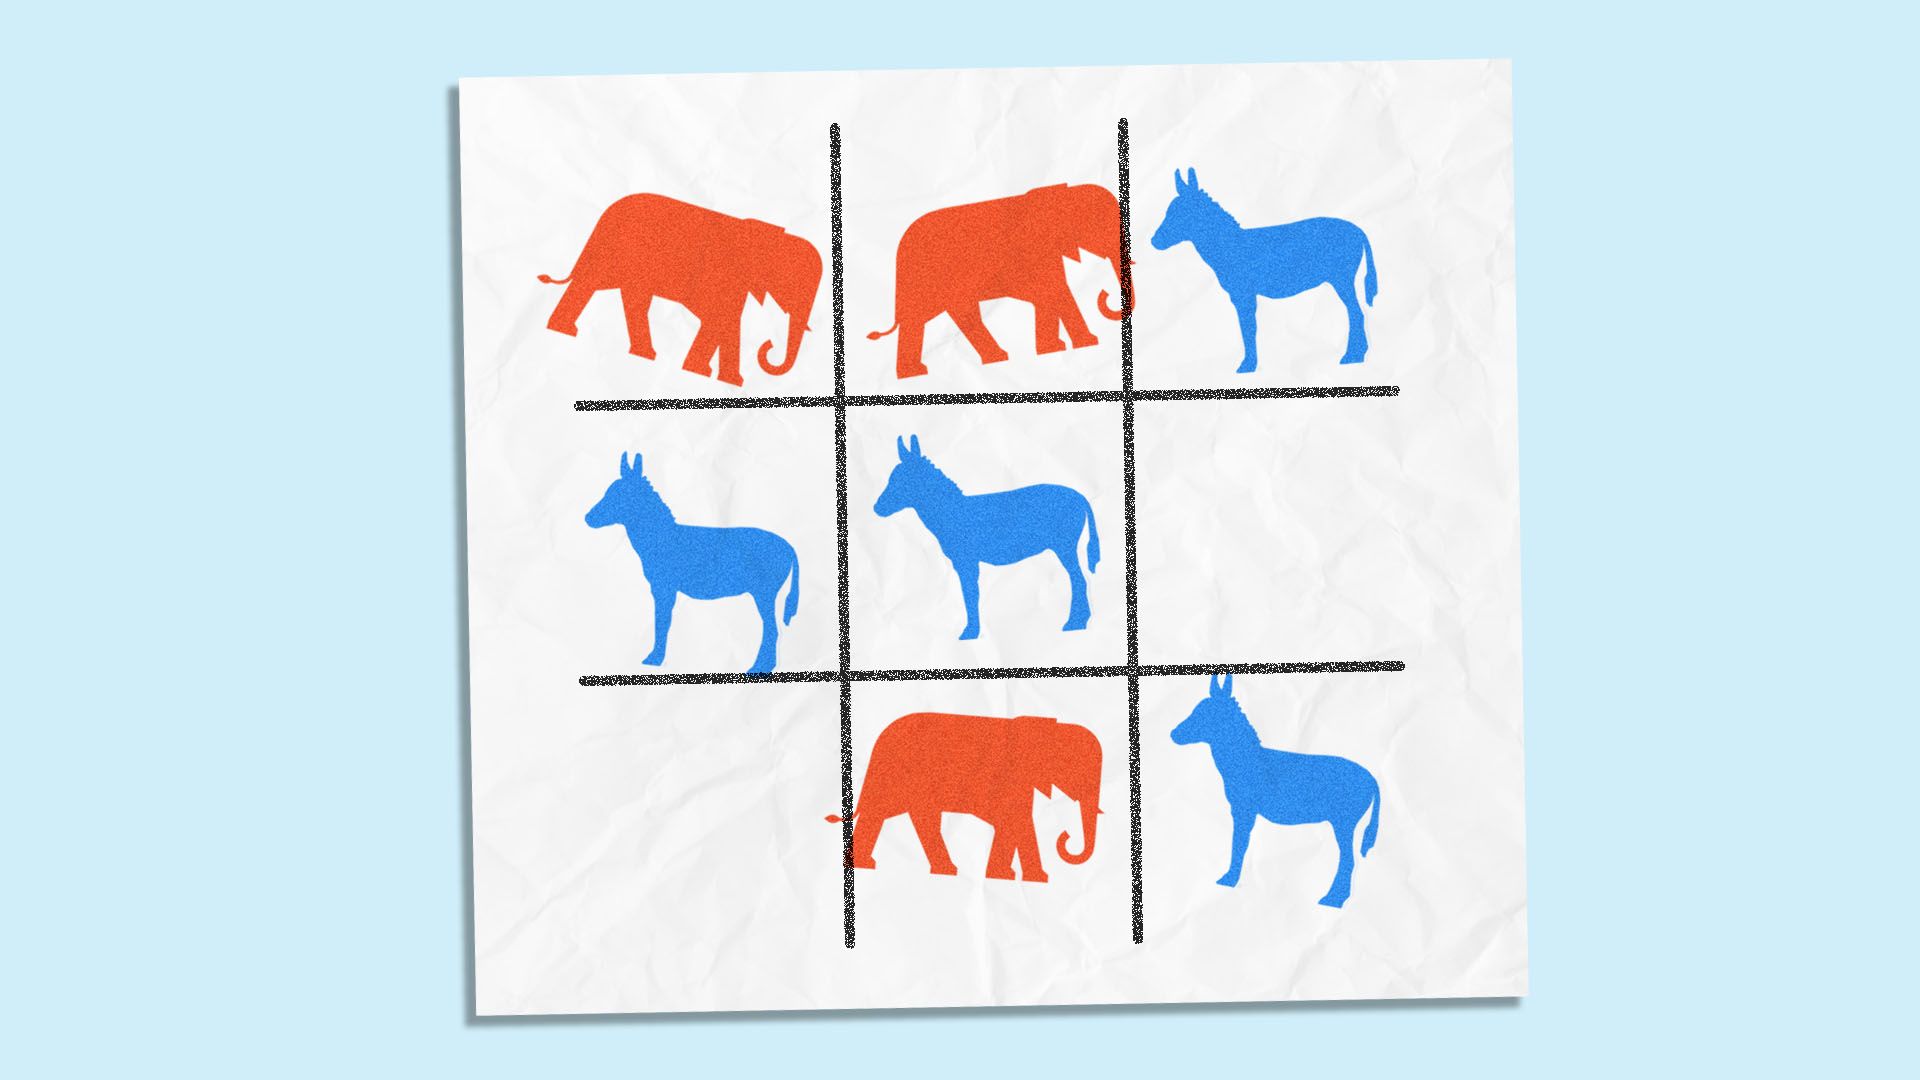 Illustration of a tic-tac-toe game with elephants and donkeys